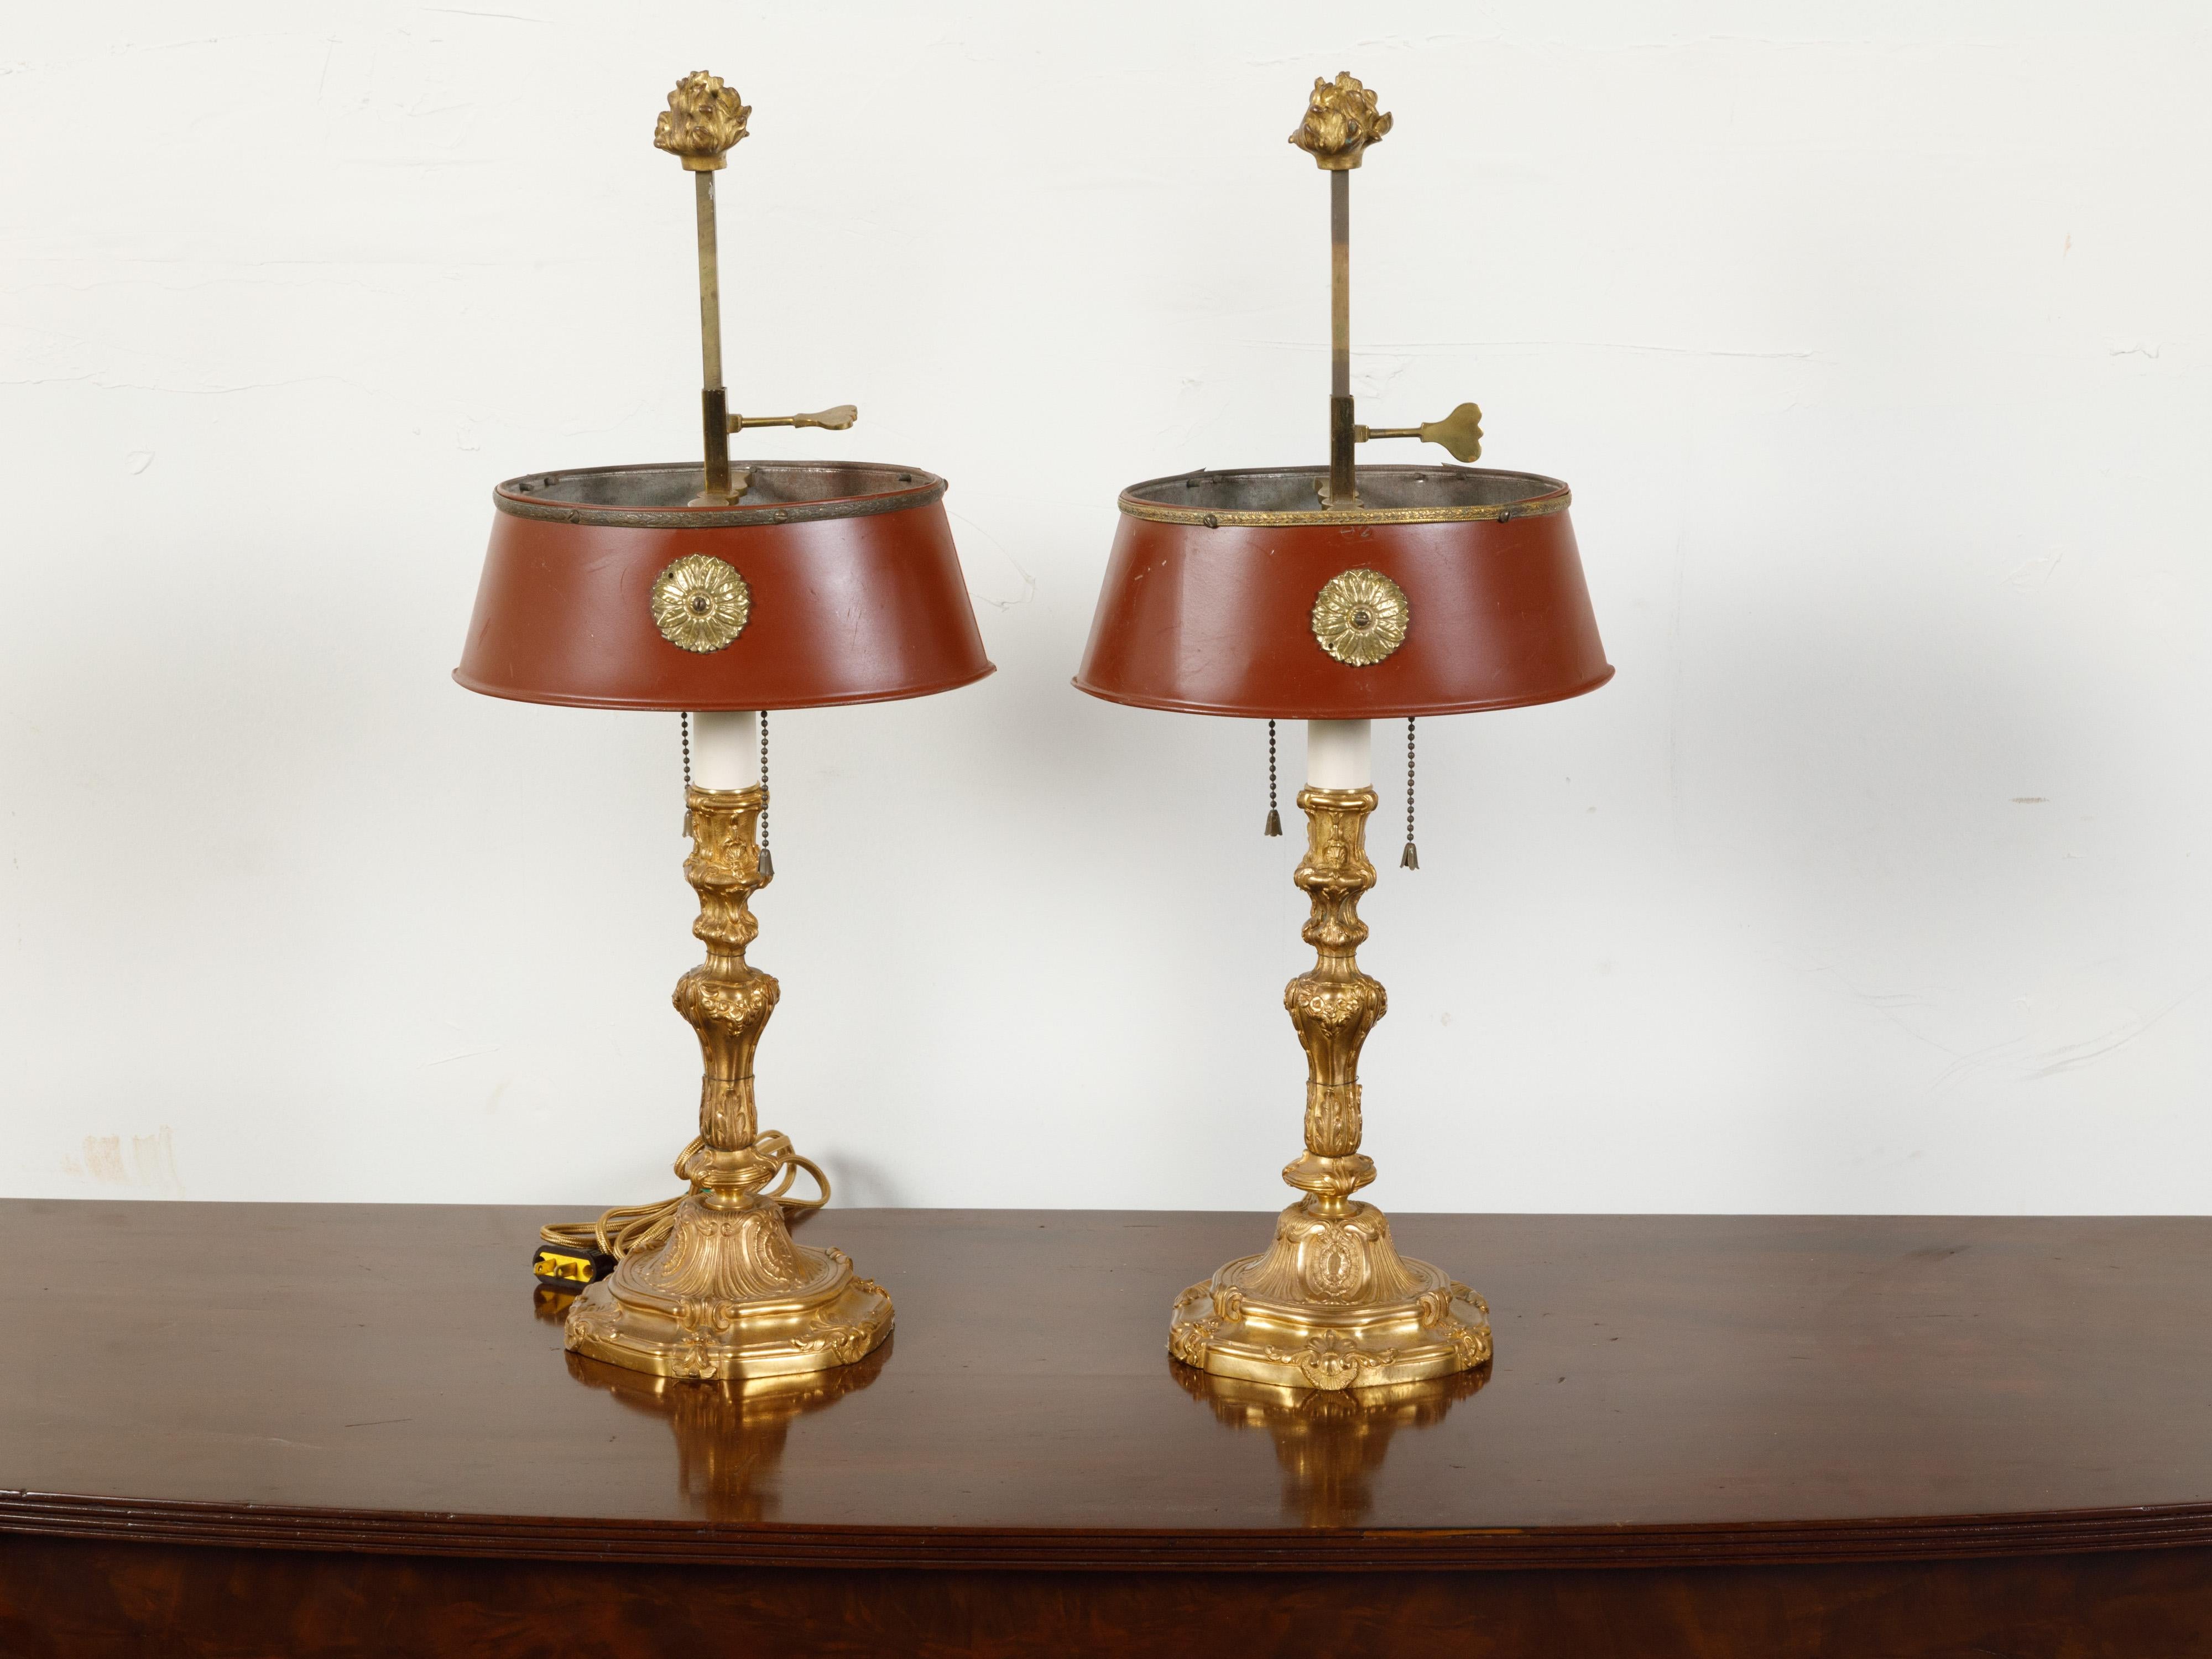 A pair of French gilt bronze table lamps from the first half of the 20th century, with red painted oval tôle shades. Created in France during the 1930s - 1940s, each of this pair of table lamps features a gilt bronze ornate base with flowers and